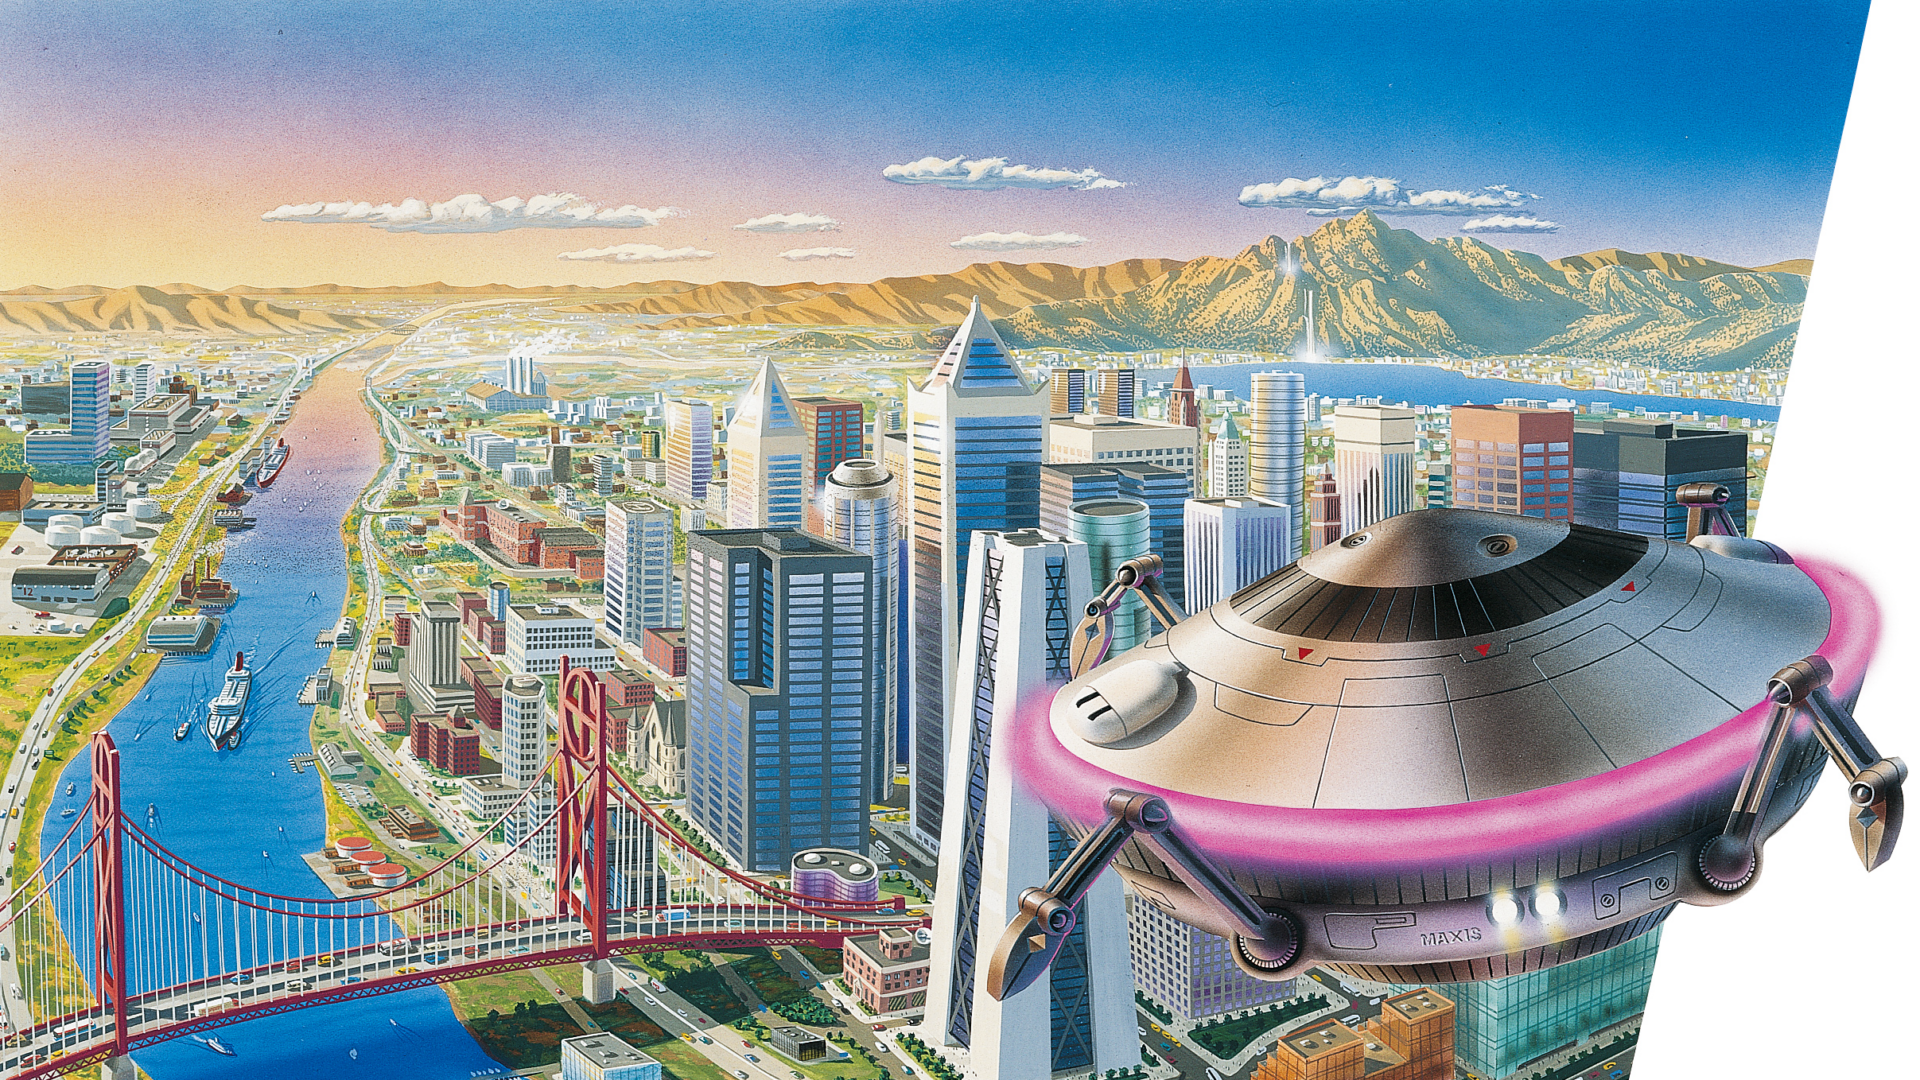 Travel back in time with these SimCity 2000 remixes